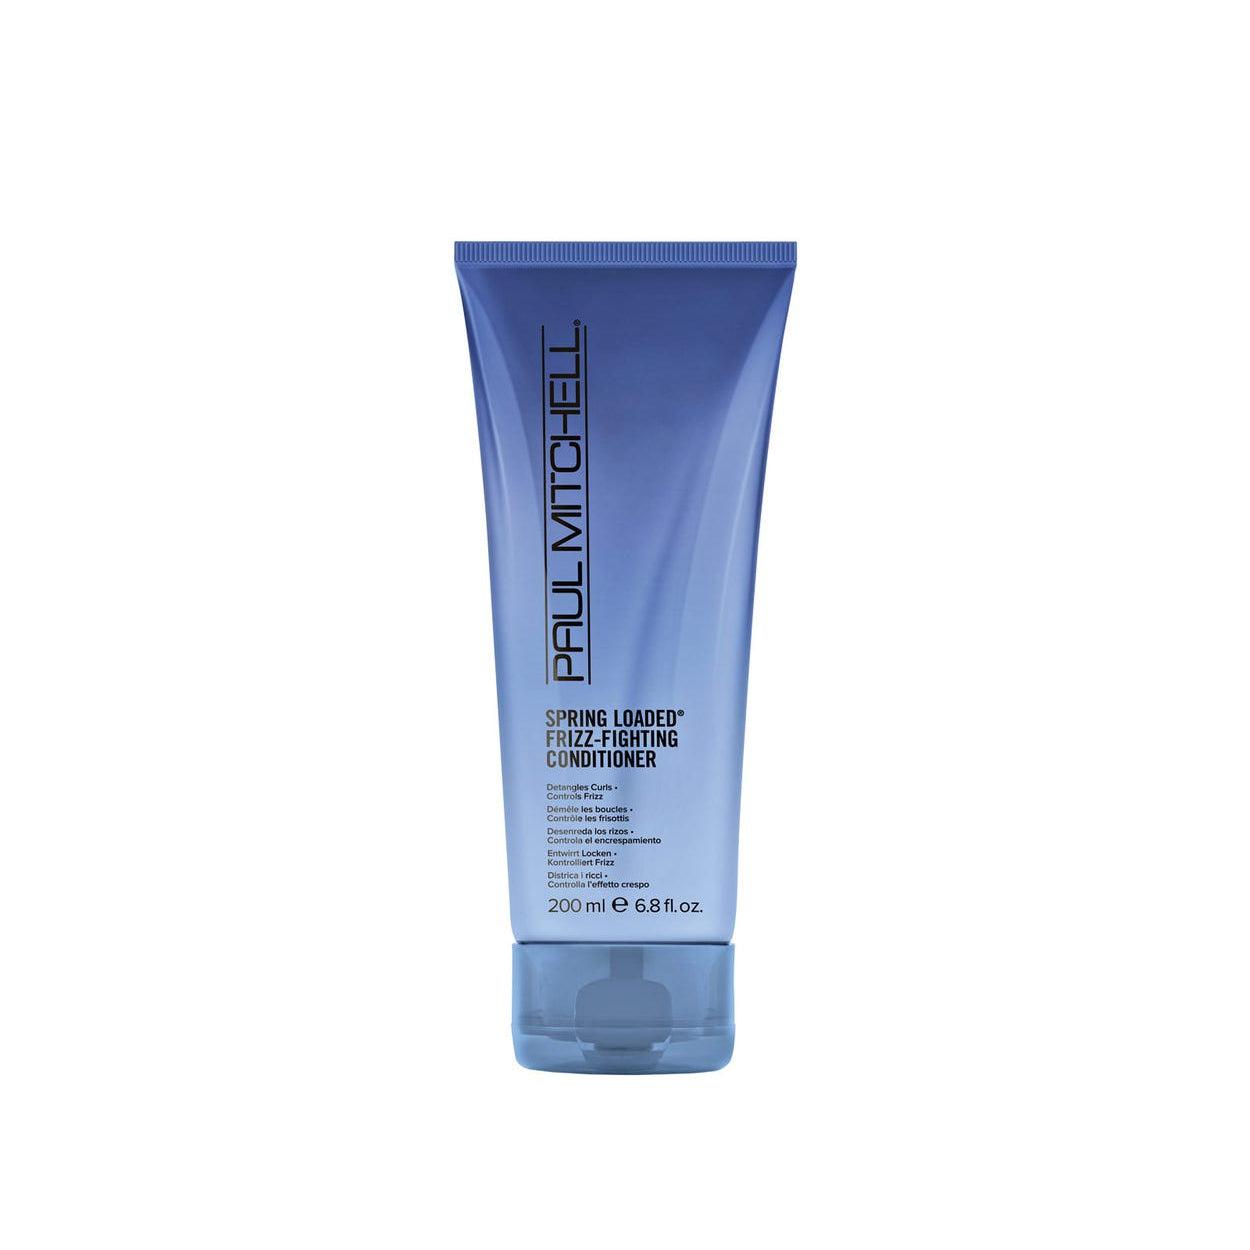 Paul Mitchell curl spring loaded frizz-fighting hárnæring 200ml